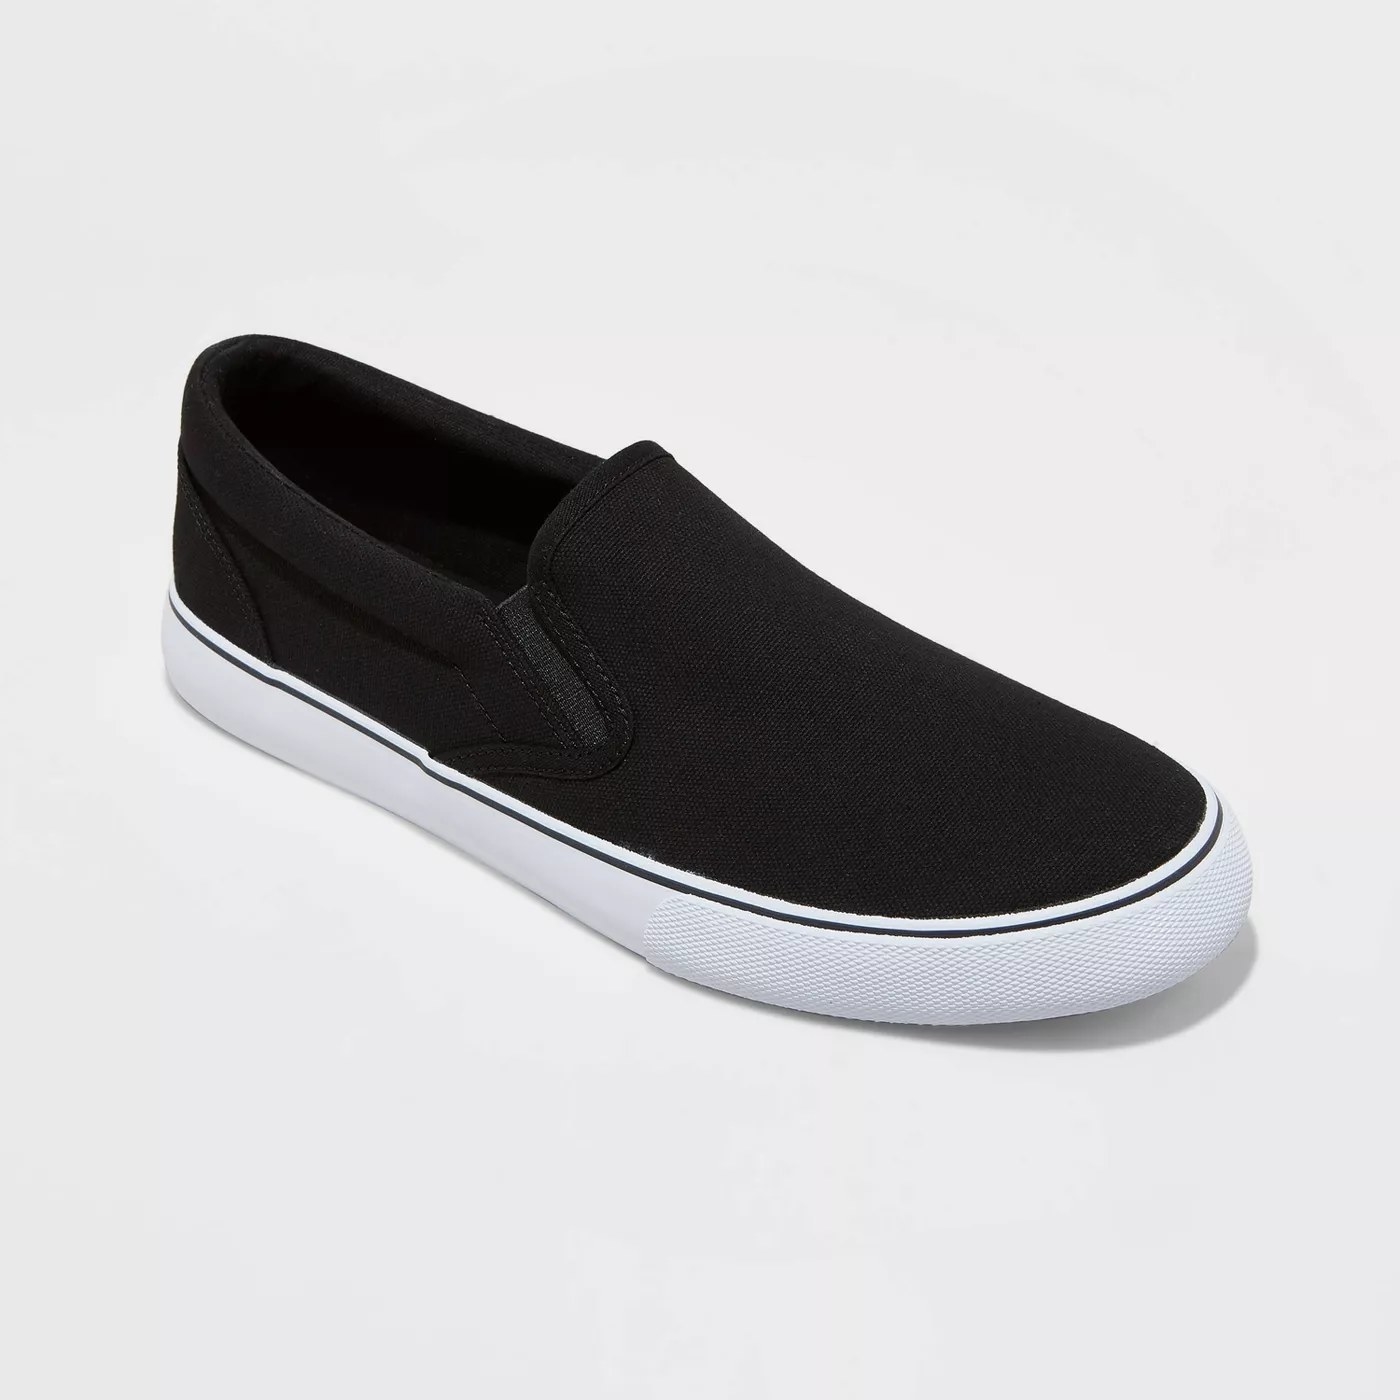 A black slip-on sneaker with a white outsole